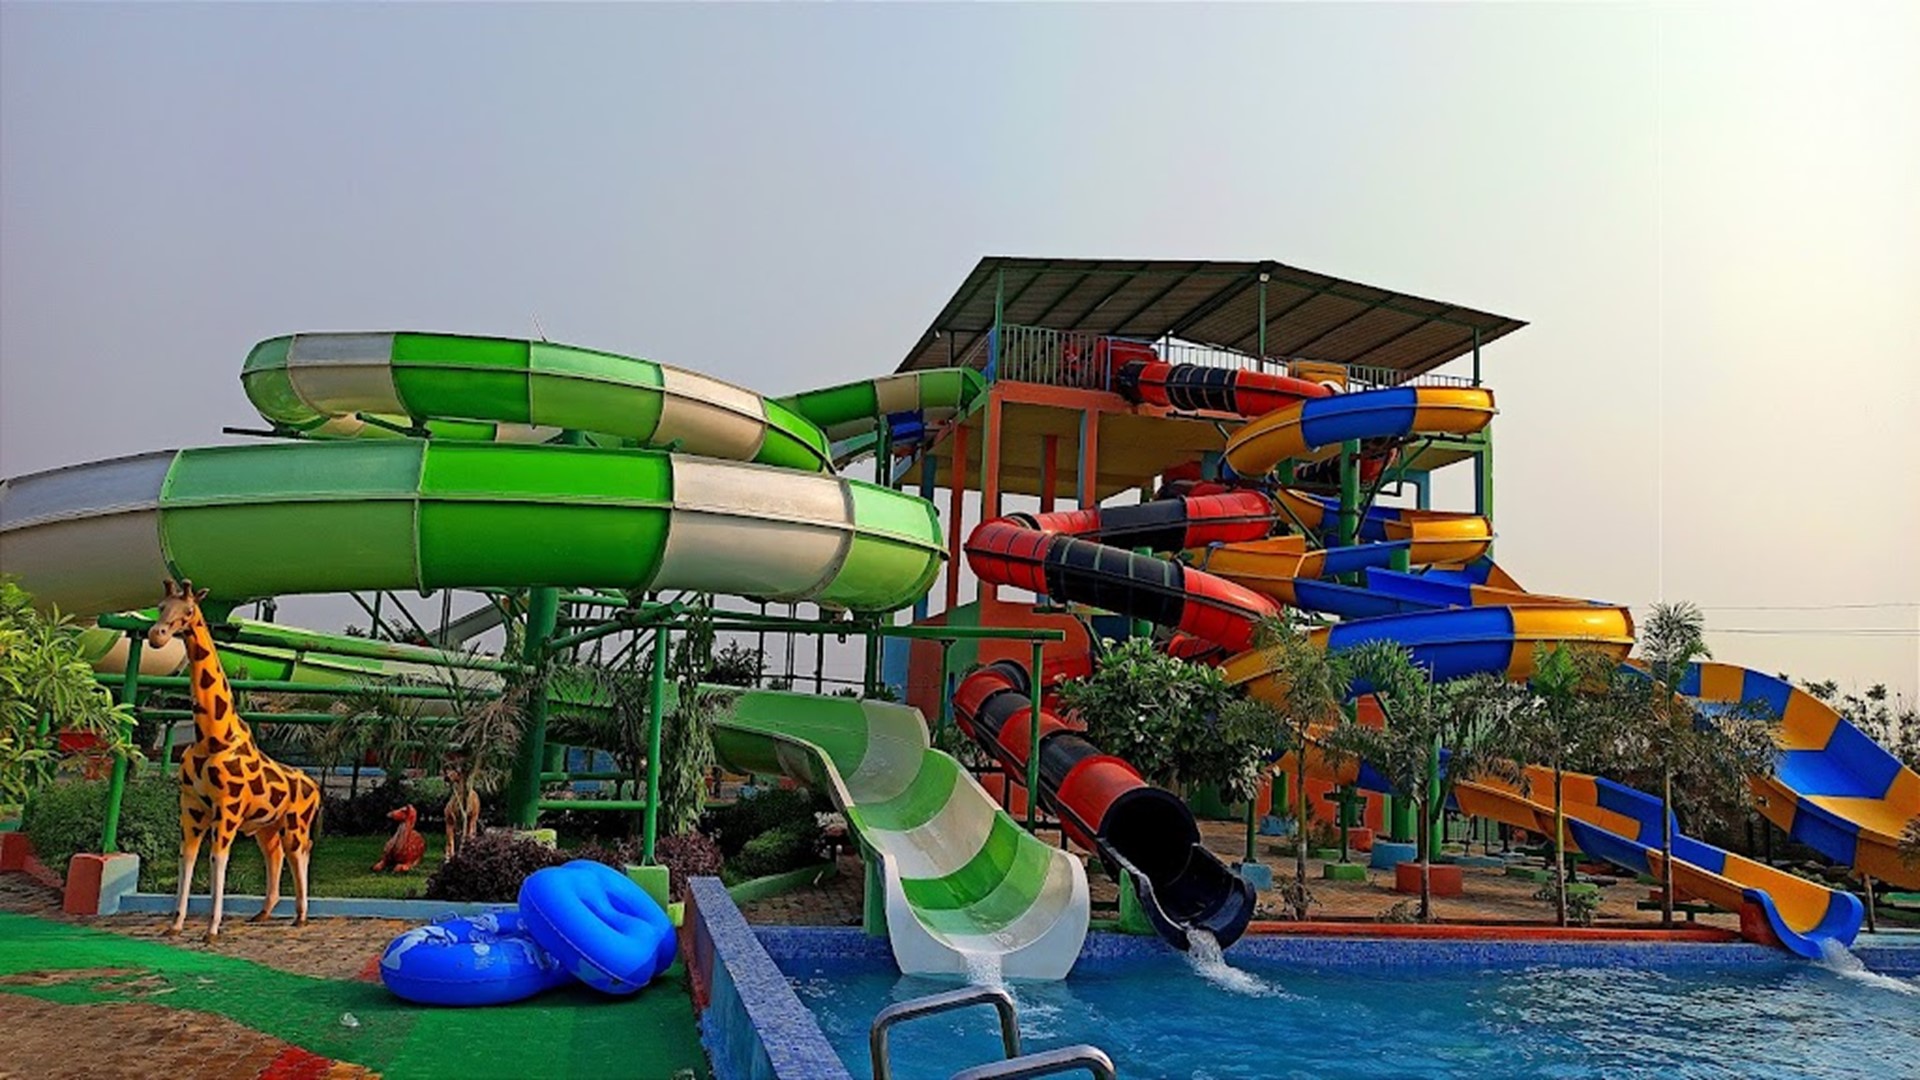 Top 10 places to visit in panipat, best places to visit in panipat, kingland water park panipat, panipat kingland water park, kingland water park in panipat,